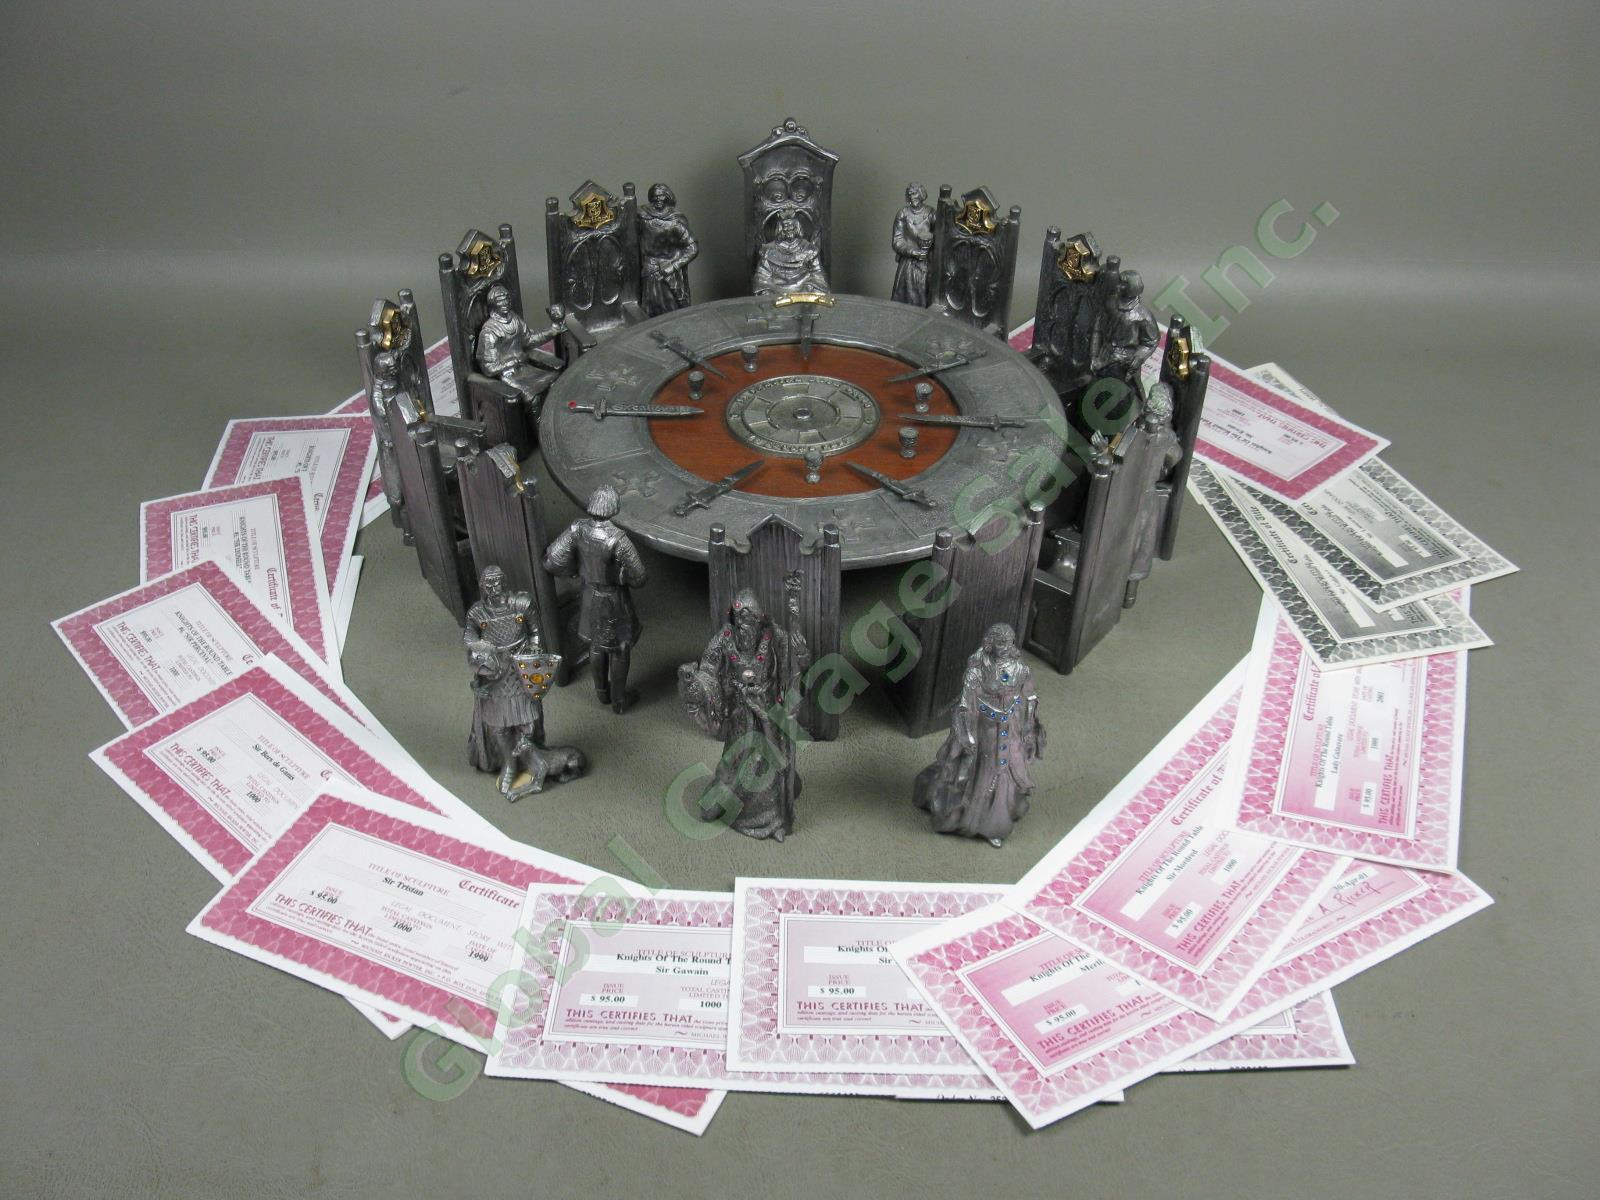 Michael Ricker Pewter Knights Of The Round Table Sculpture Statue Figure Set Lot